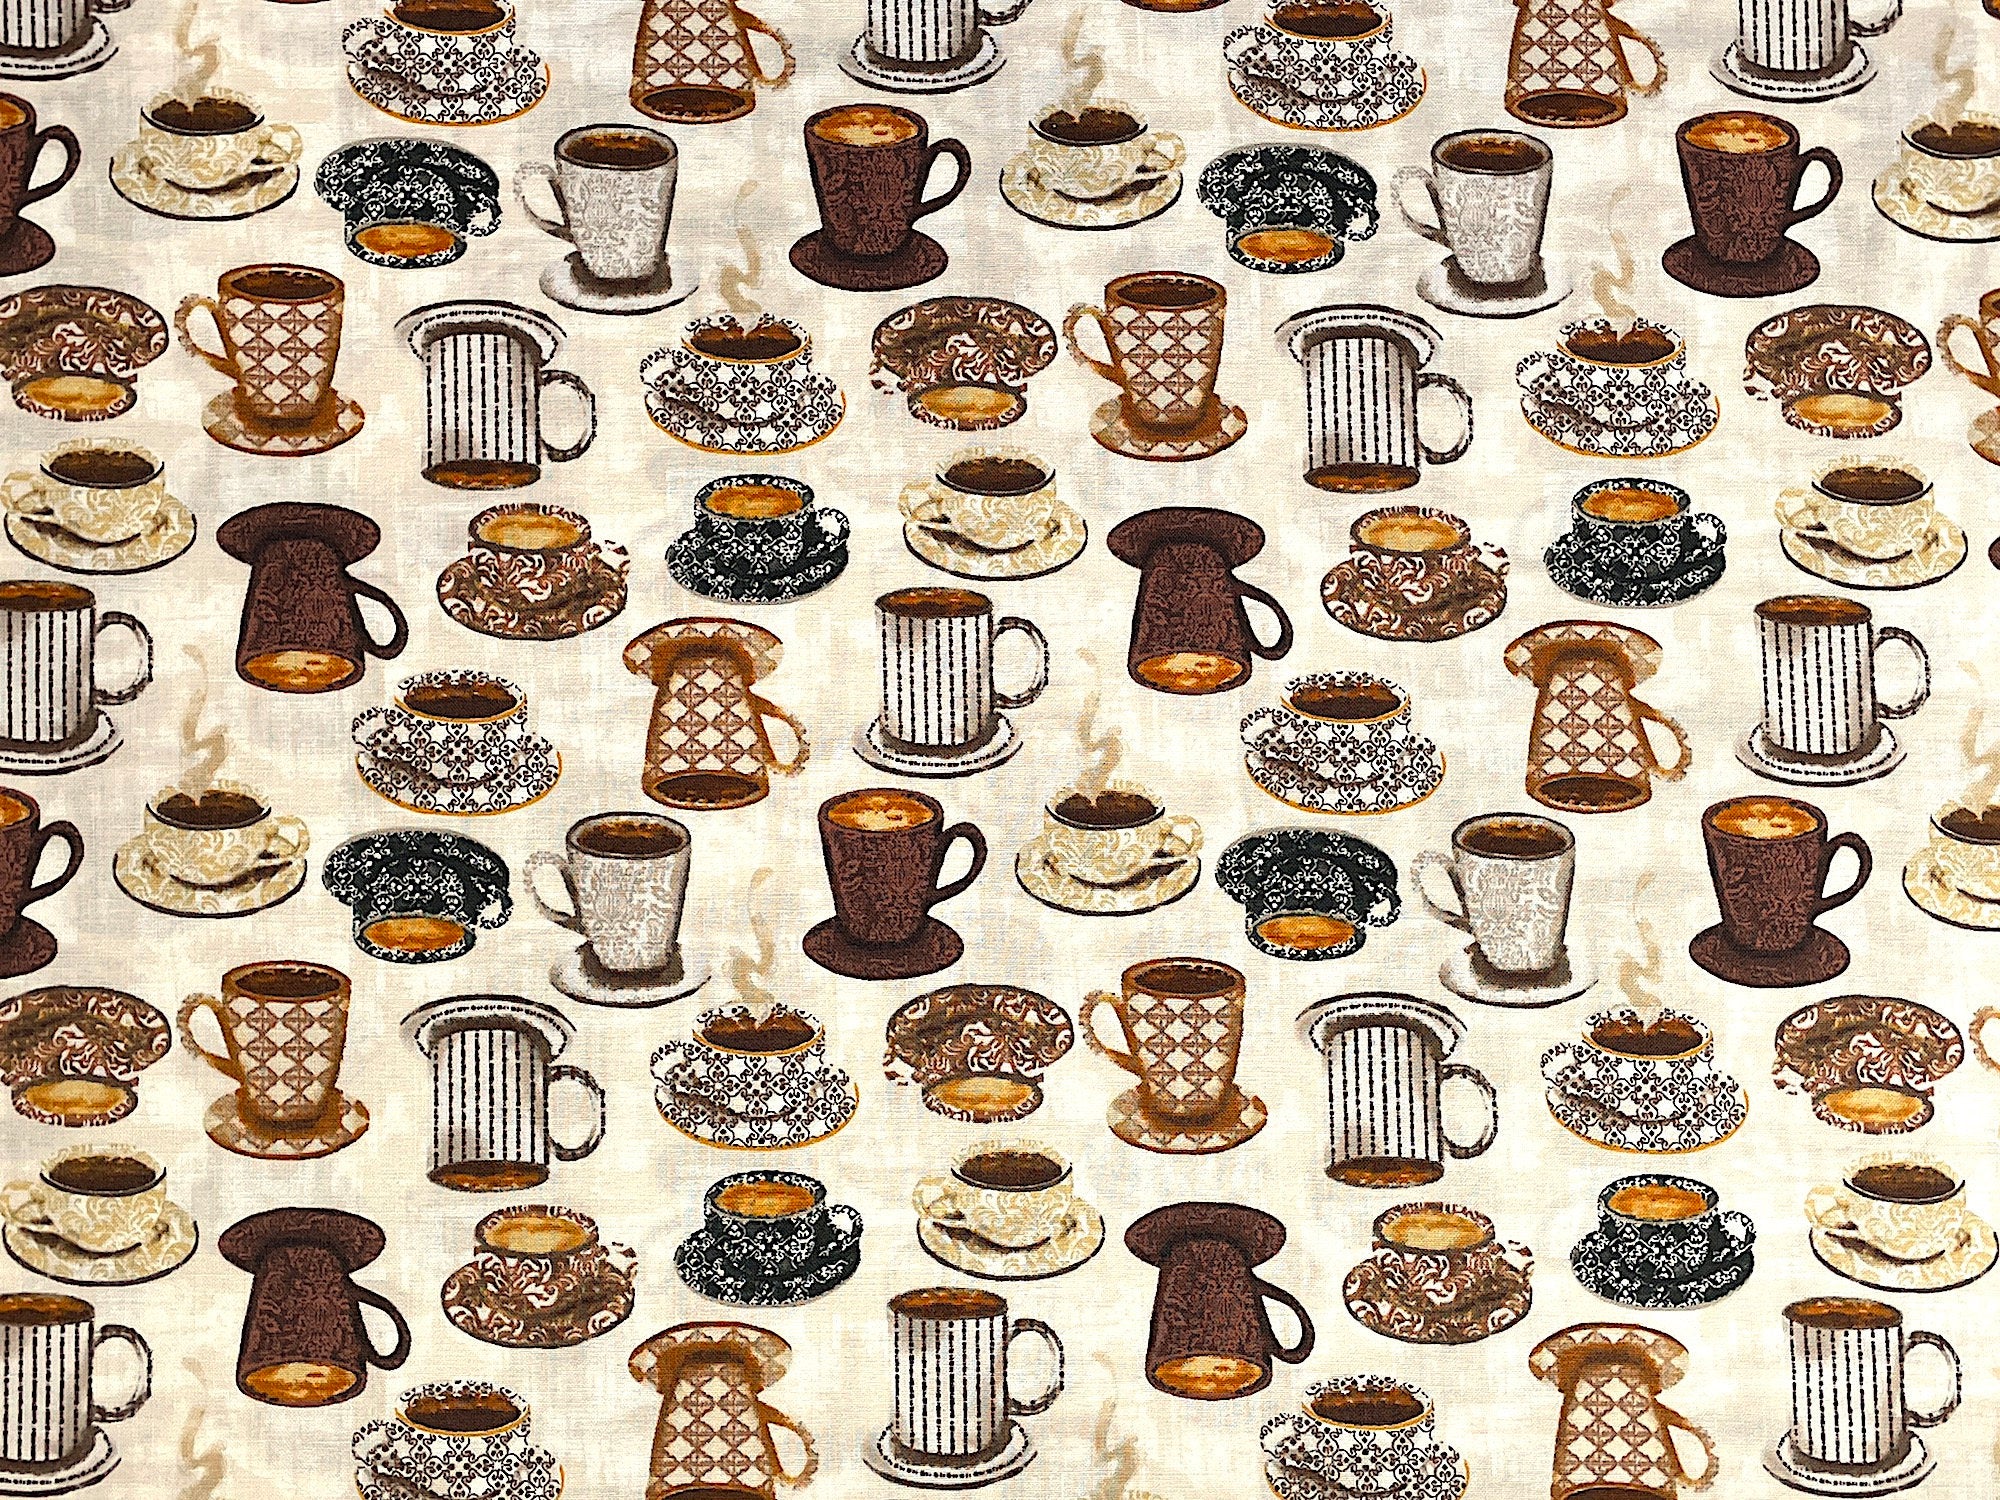 This fabric is part of the Coffee Connoisseur collection by Jean Plout. This cream fabric is covered with coffee cups and mugs filled with coffee sitting on saucers.